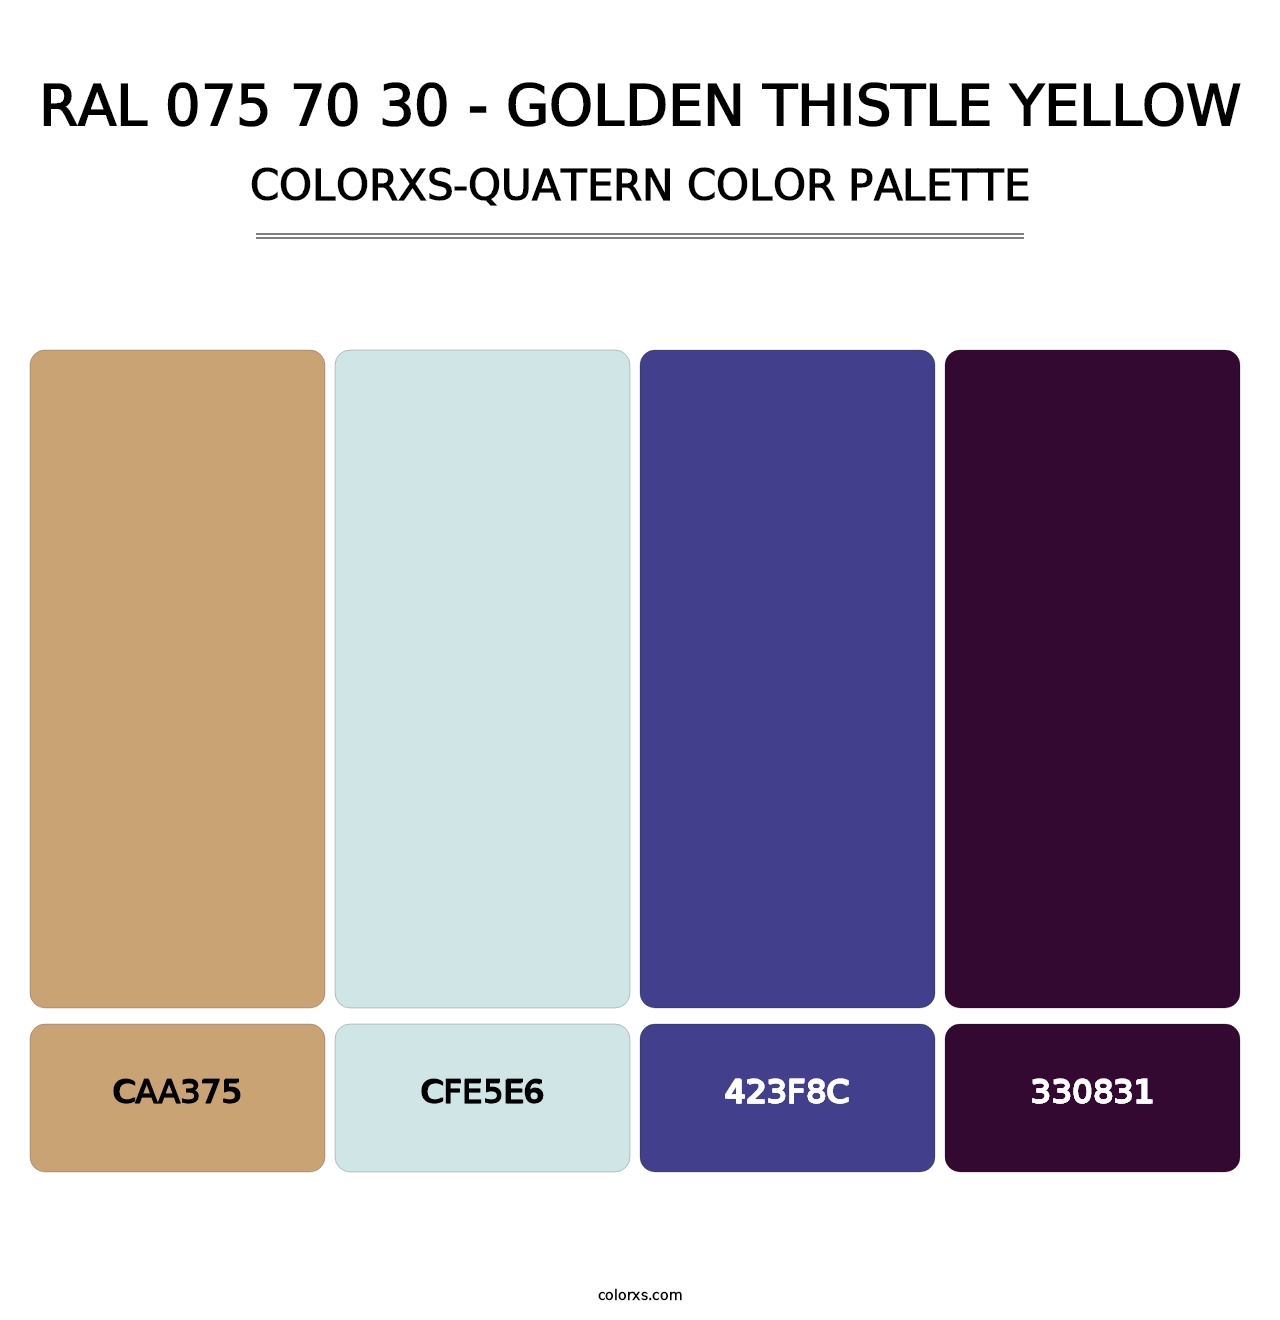 RAL 075 70 30 - Golden Thistle Yellow - Colorxs Quatern Palette